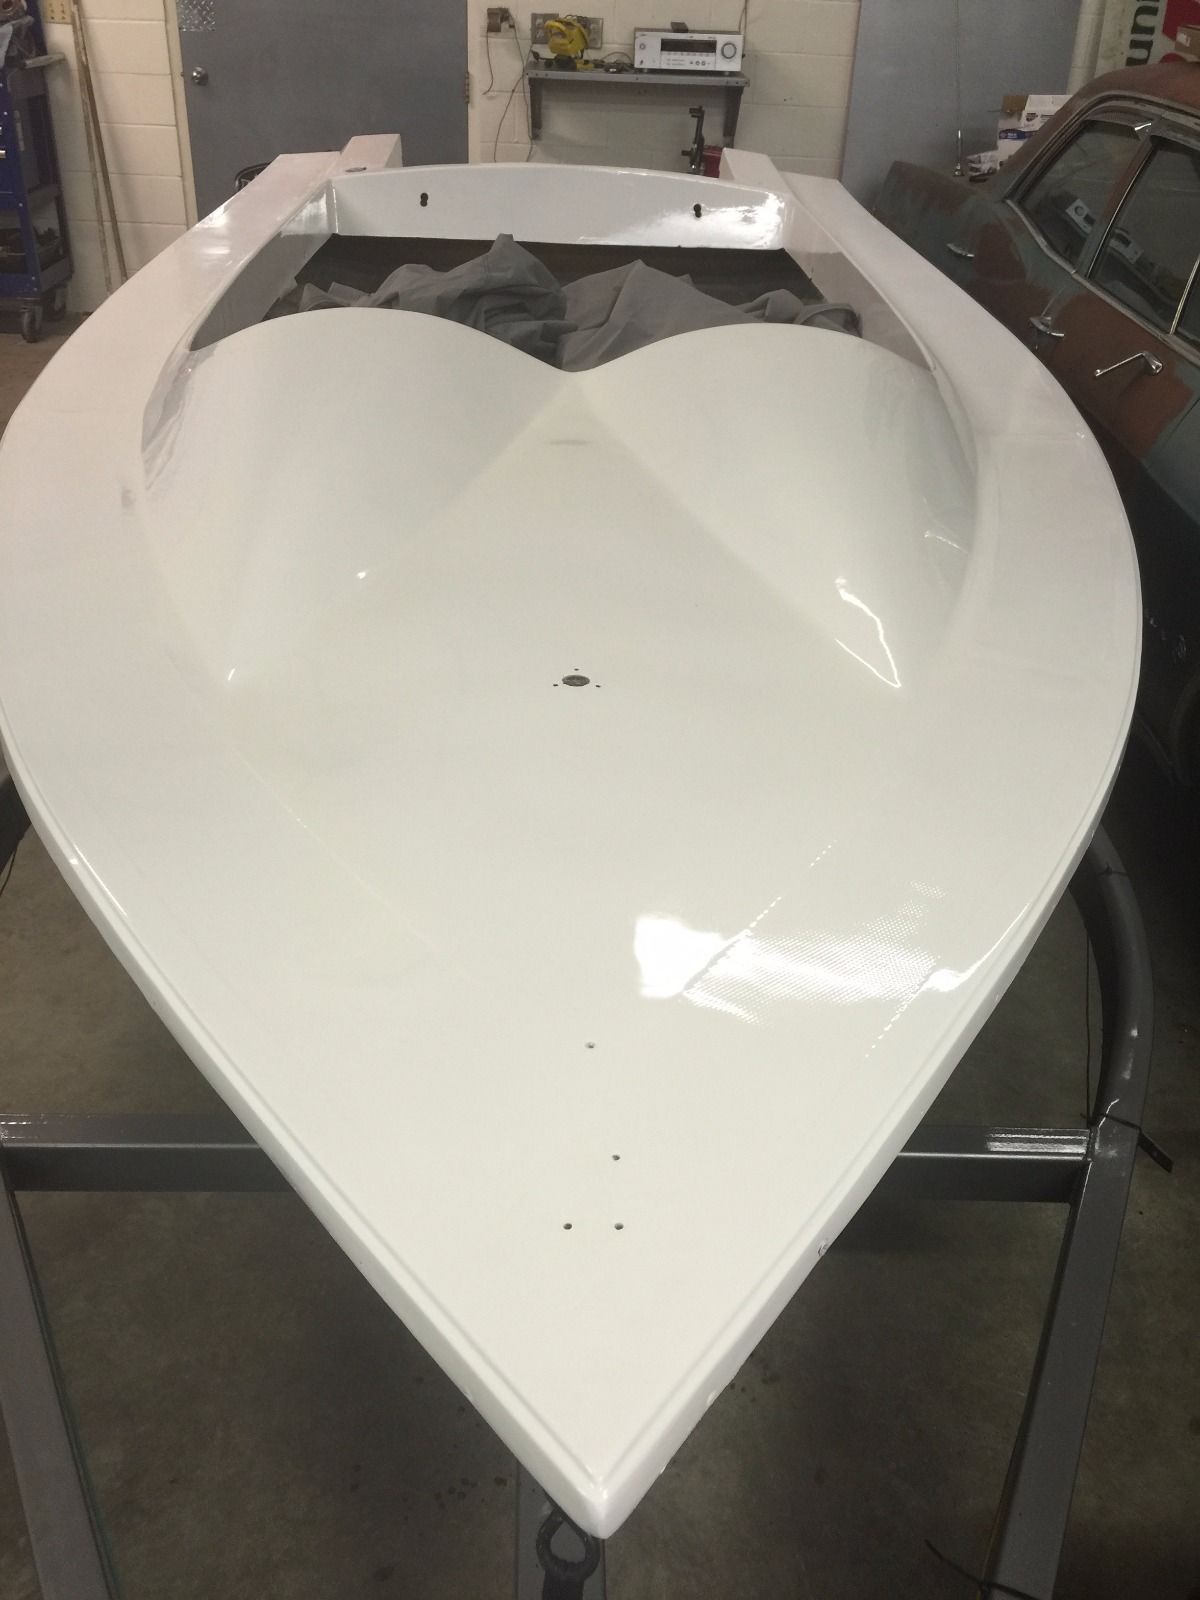 Magnum 1968 for sale for $4,000 - Boats-from-USA.com